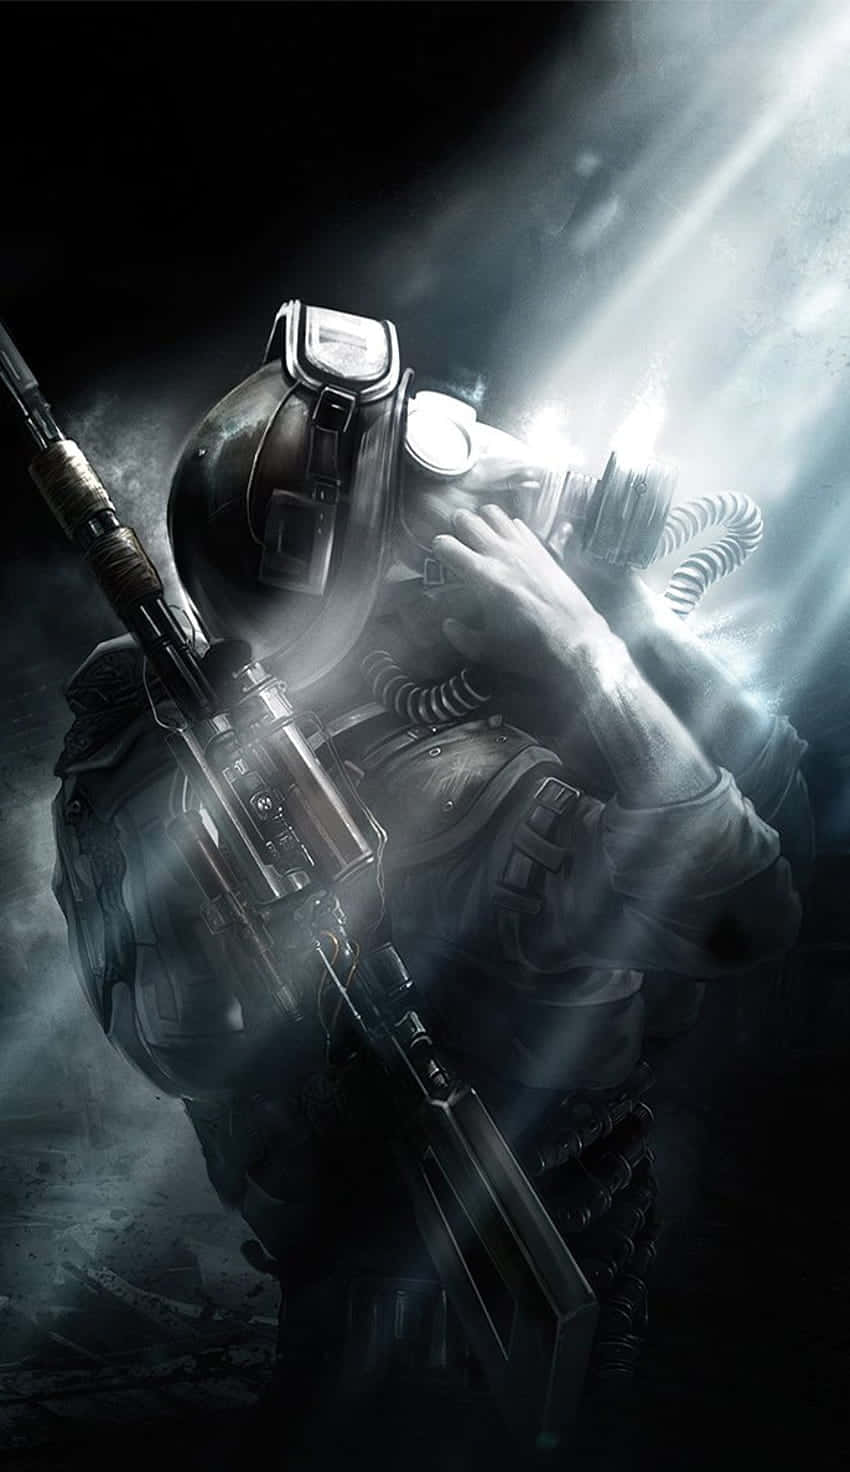 Download Android: Metro Last Light | Wallpapers.com